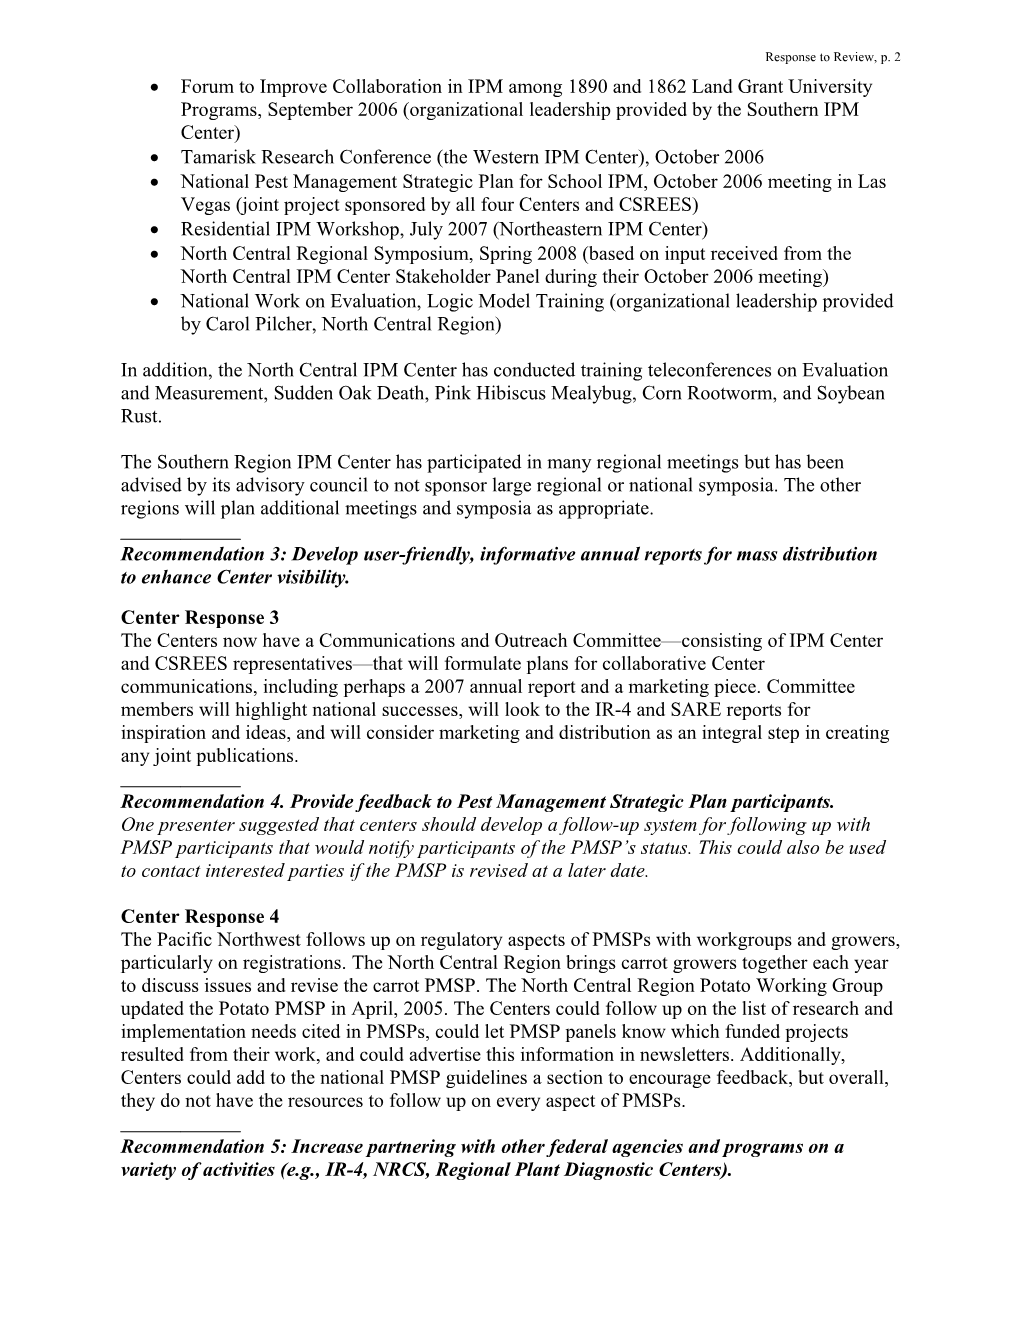 Regional IPM Centers Response to the 2006 Mid-Term Review